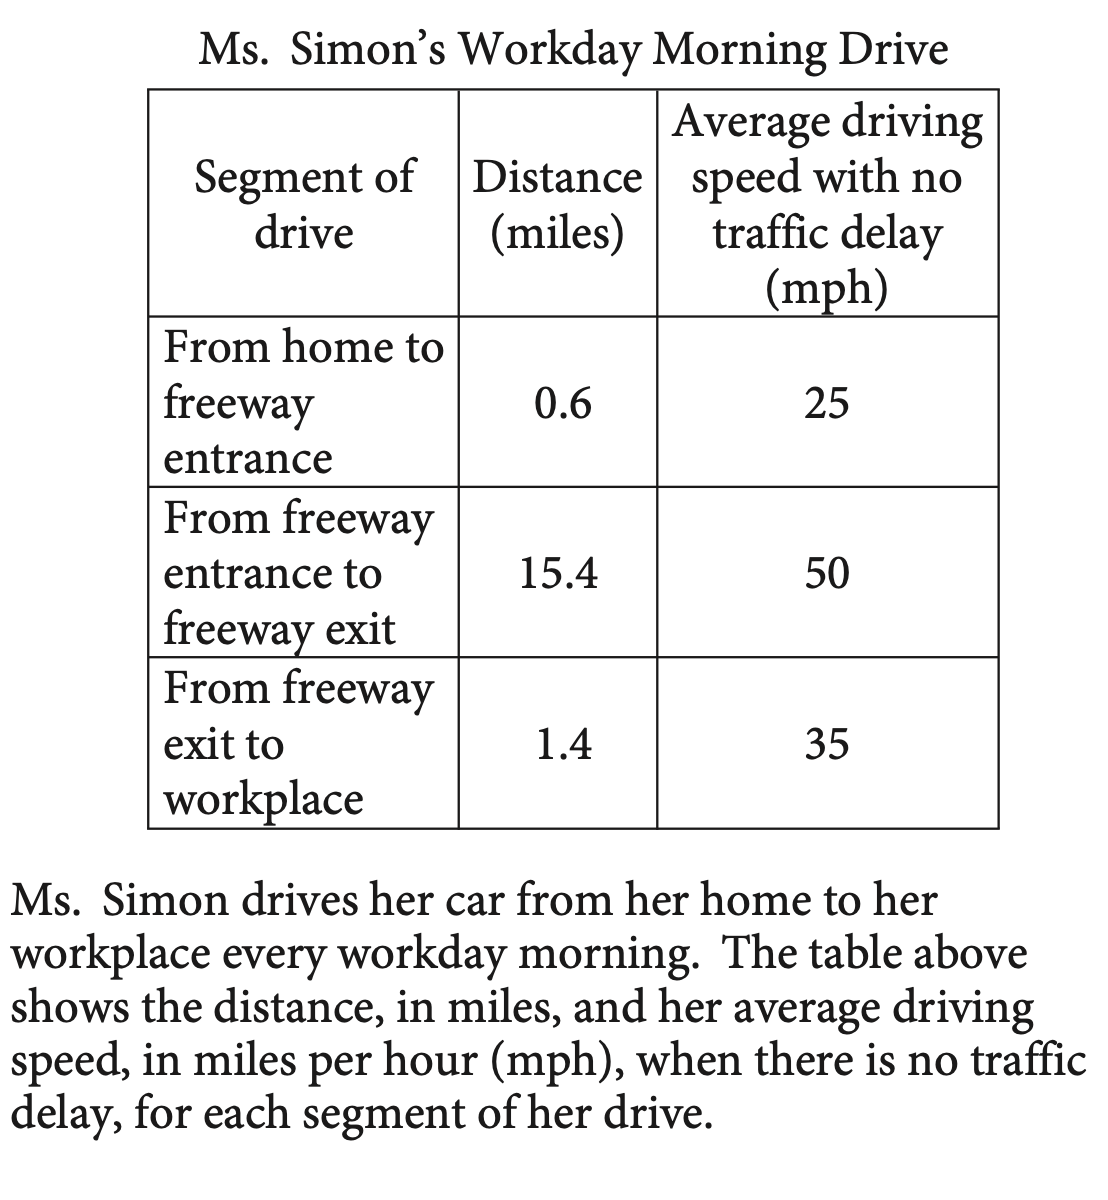 Ms. Simon's Workday Morning Drive
Average driving
Segment of Distance speed with no
traffic delay
(mph)
drive
(miles)
From home to
freeway
0.6
25
entrance
From freeway
entrance to
15.4
50
freeway exit
From freeway
exit to
1.4
35
workplace
Ms. Simon drives her car from her home to her
workplace every workday morning. The table above
shows the distance, in miles, and her average driving
speed, in miles per hour (mph), when there is no traffic
delay, for each segment of her drive.
